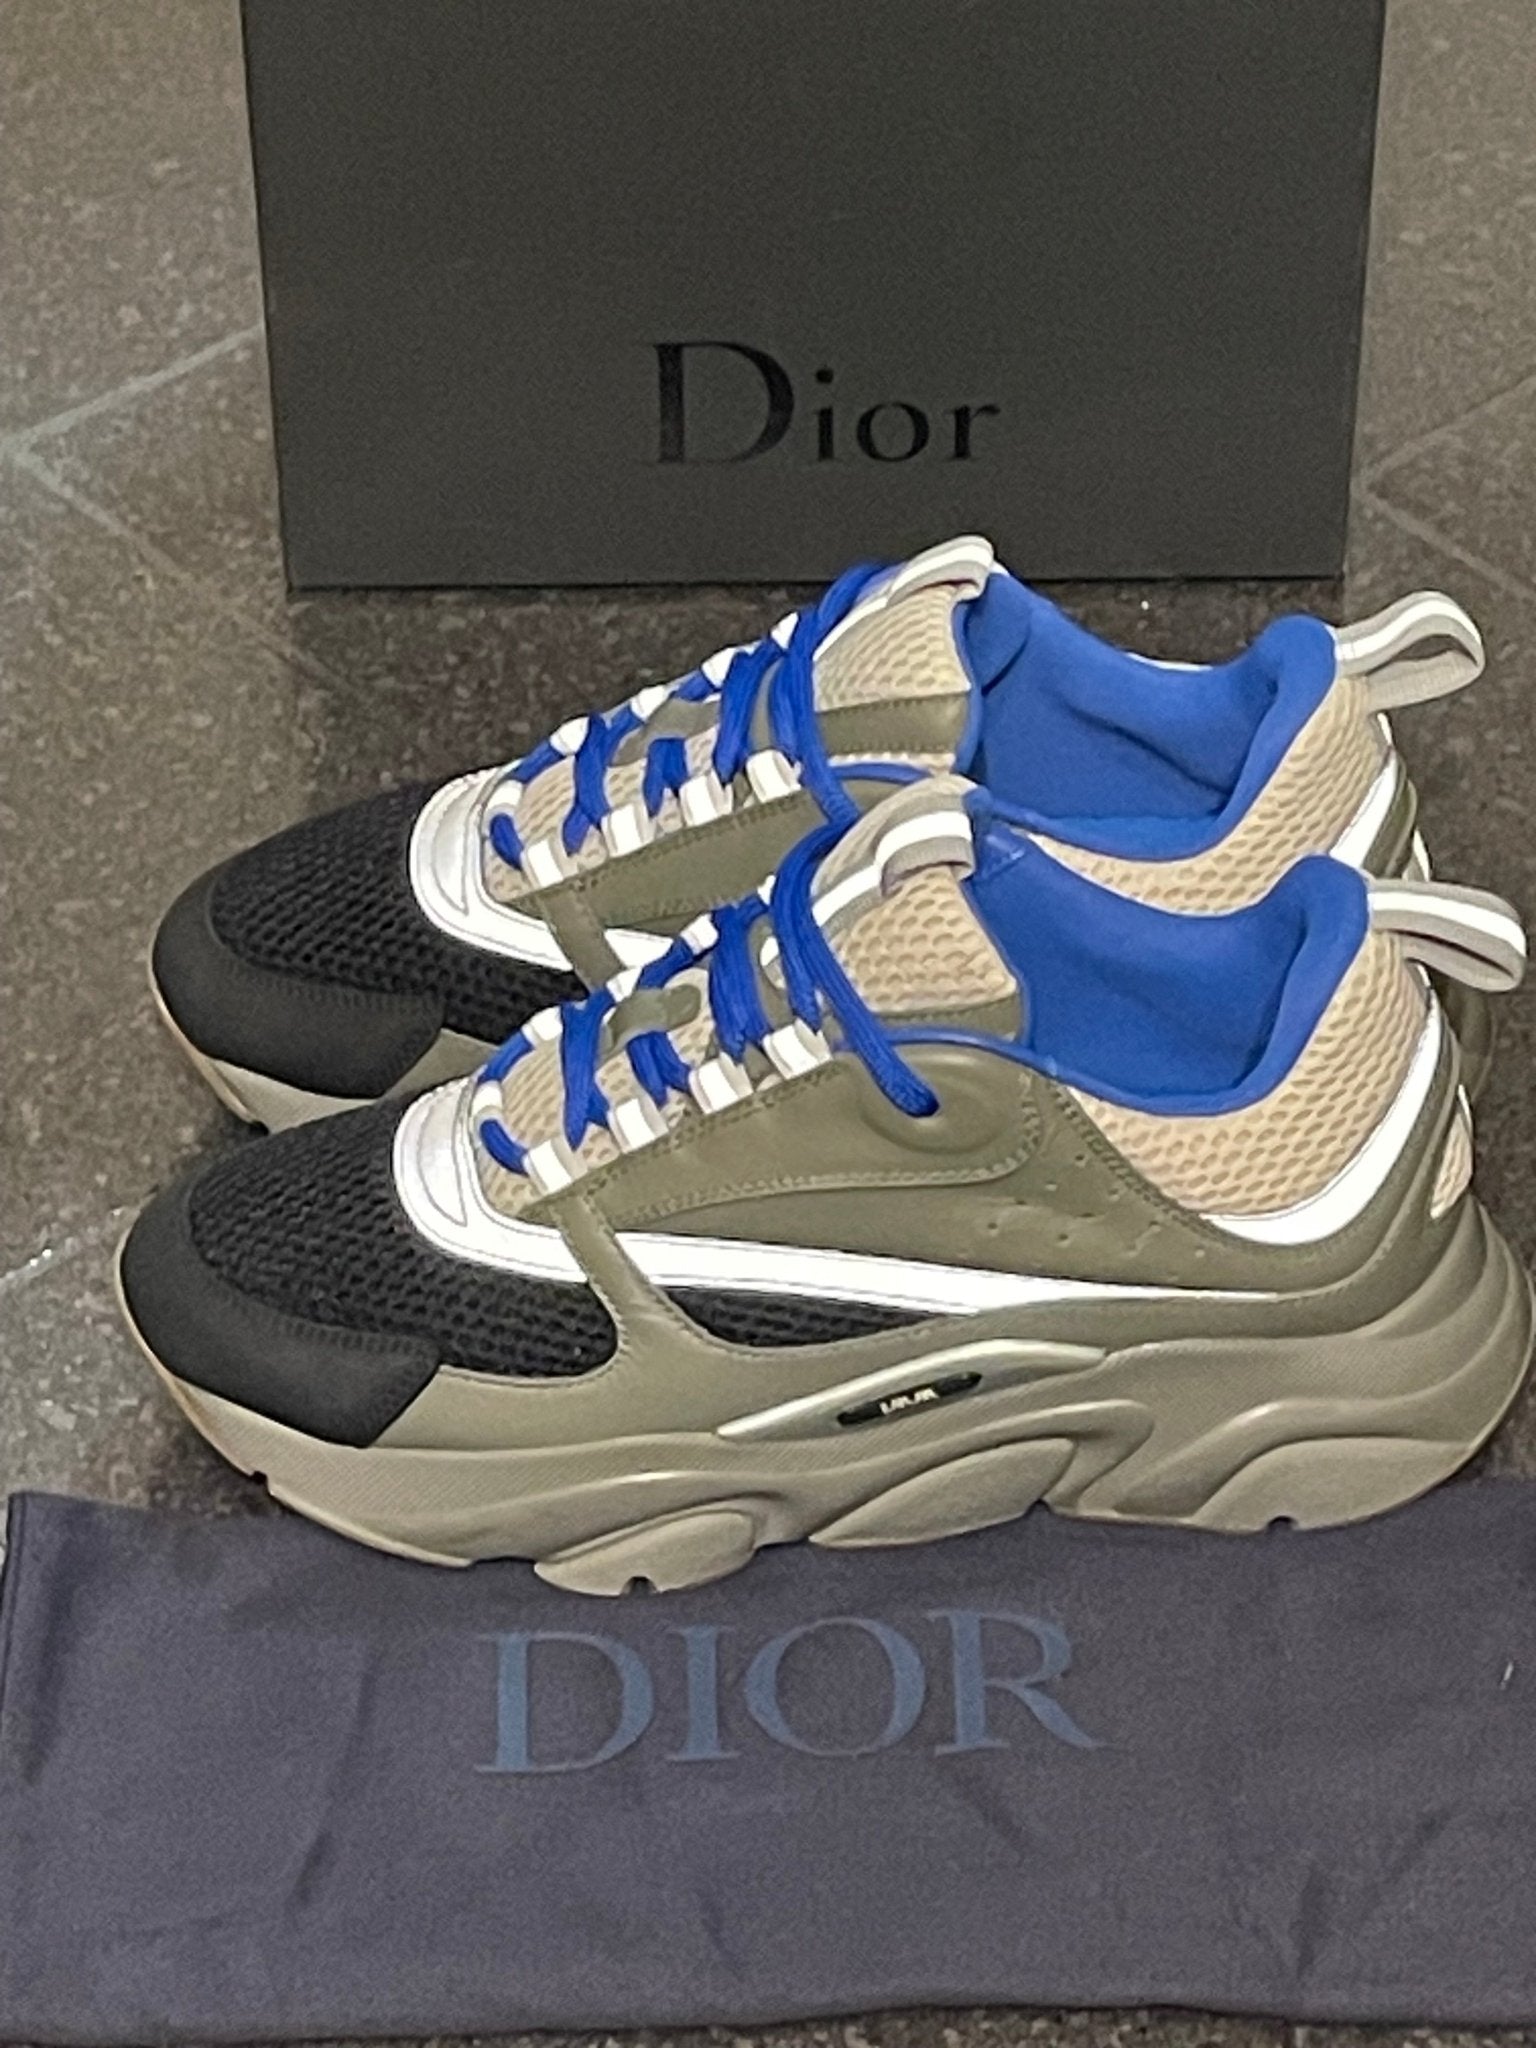 Christian Dior B22 Cream Black Olive Blue Technical Sneakers Size UK 6 - V & G Luxe Boutique